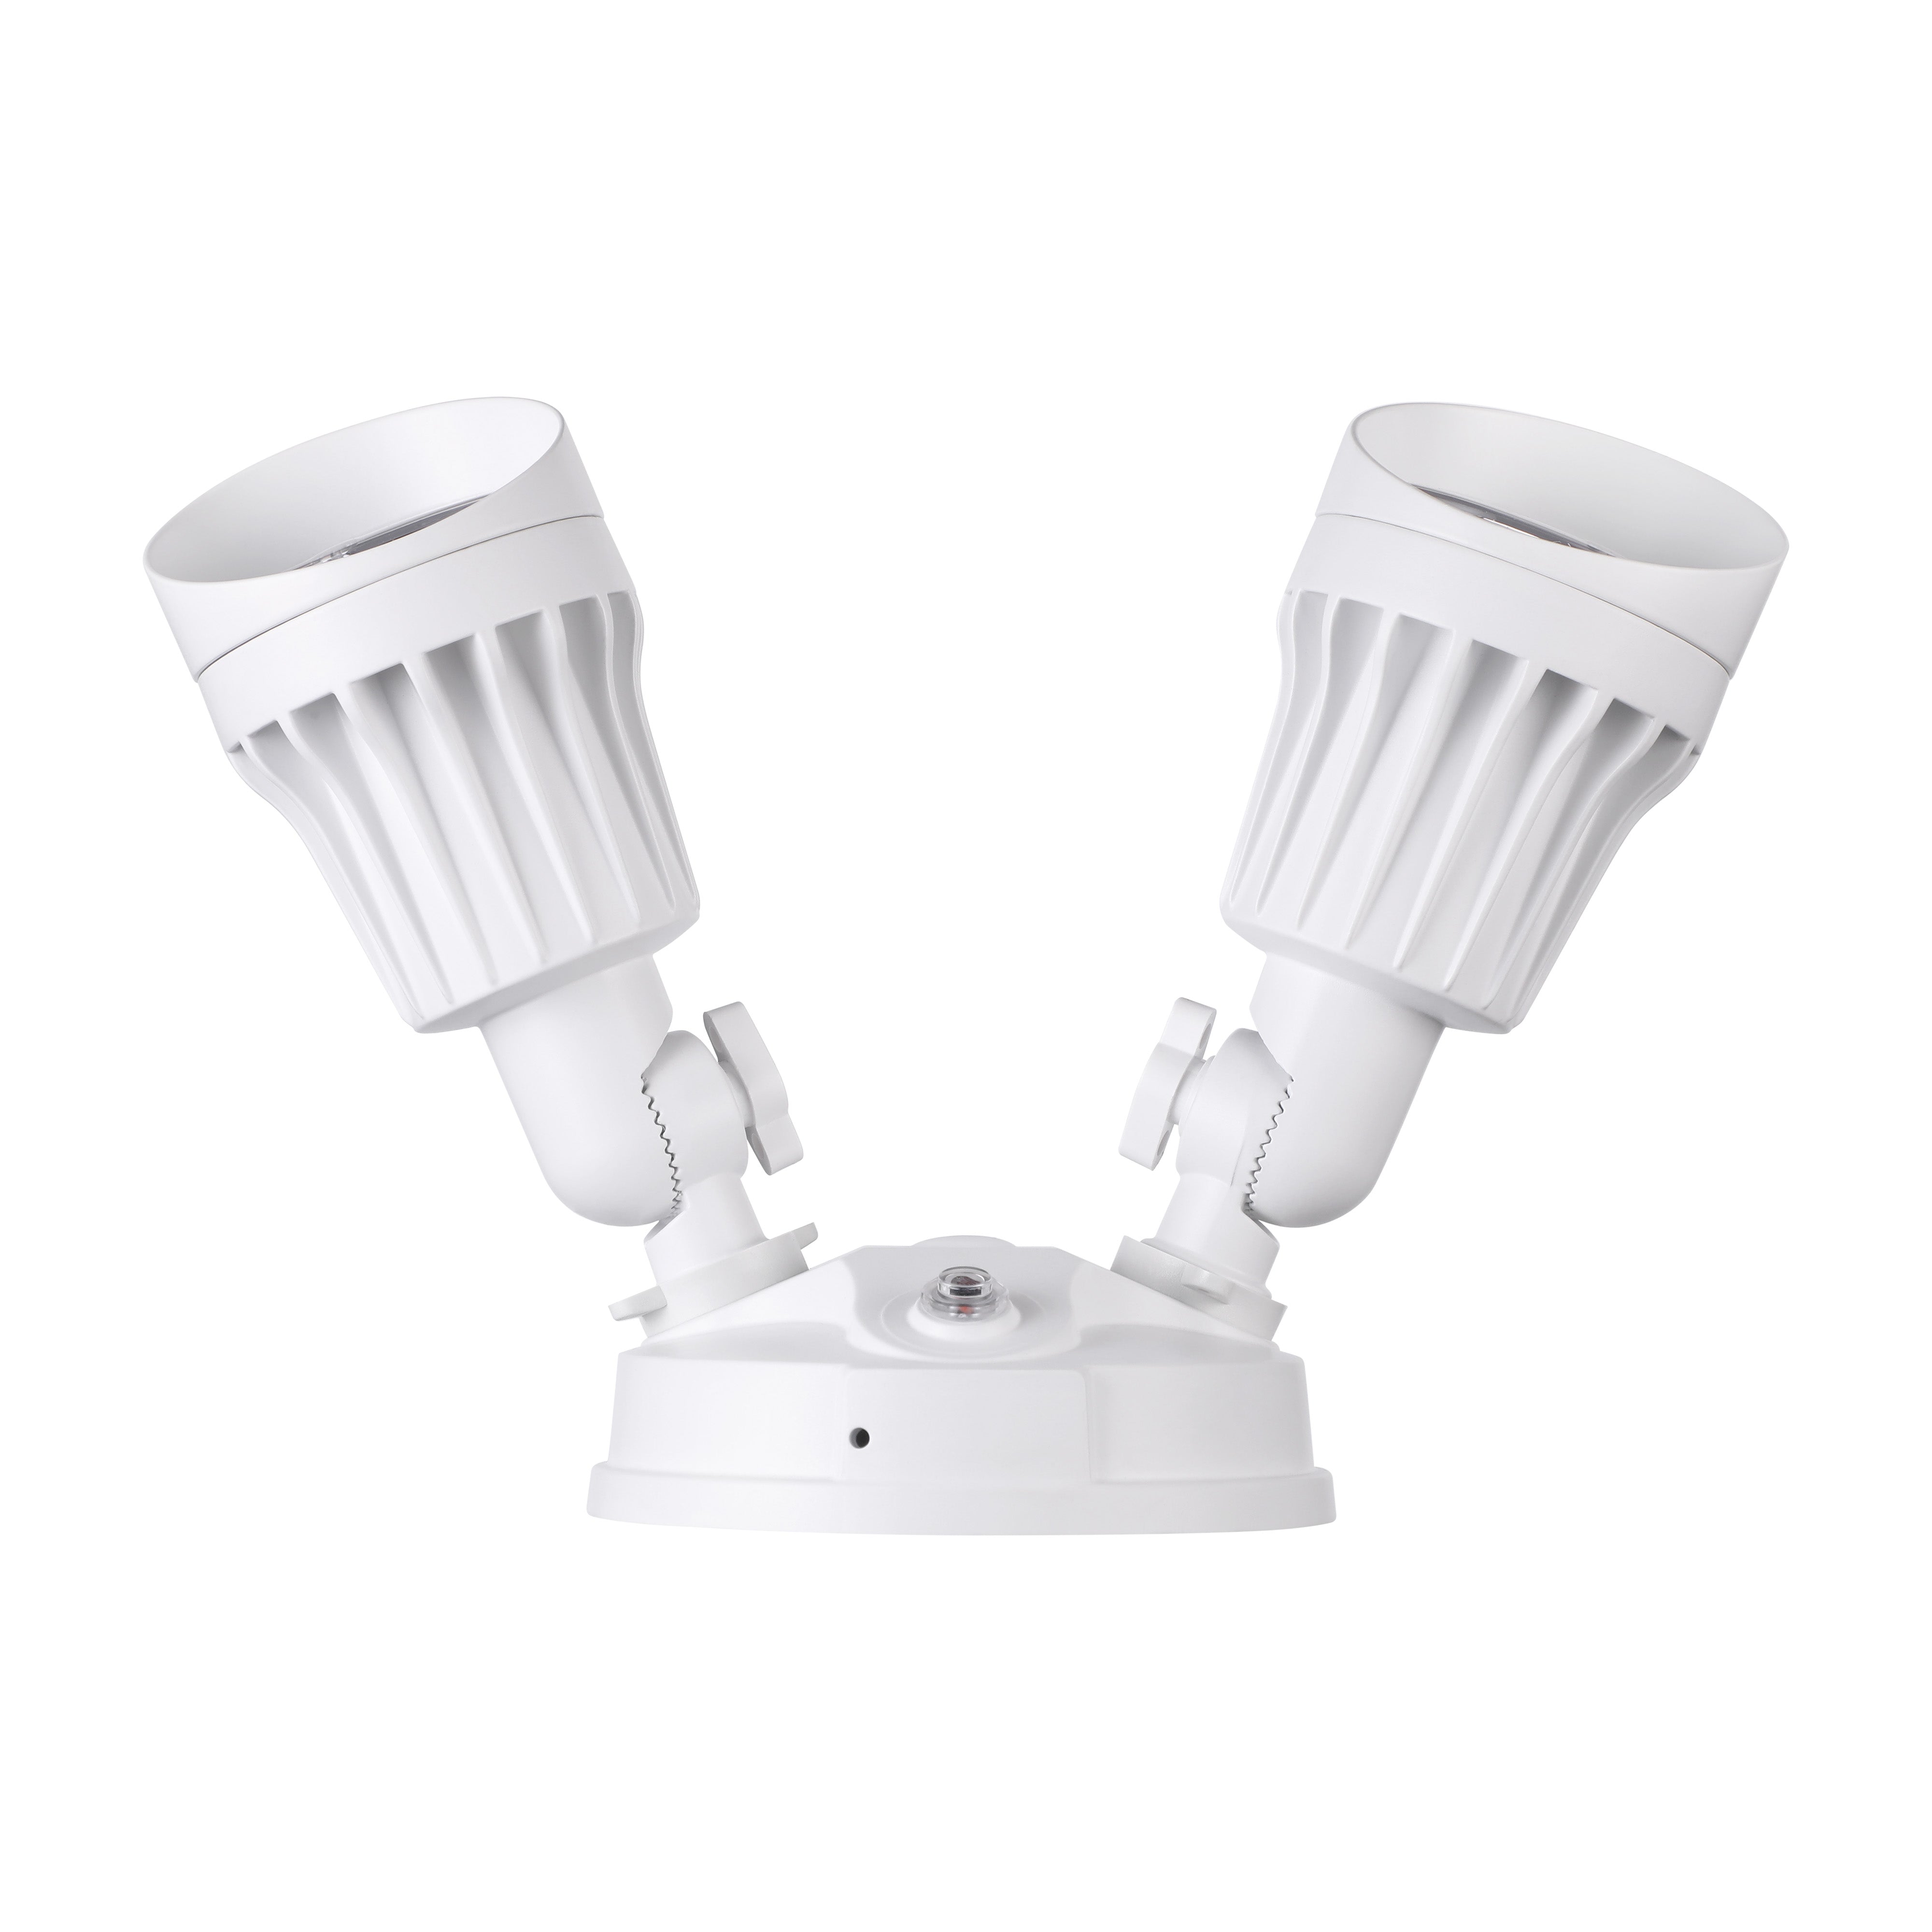 Watchman+ Dusk-to-Dawn 25W LED Security Lights - White - Adjustable CCT